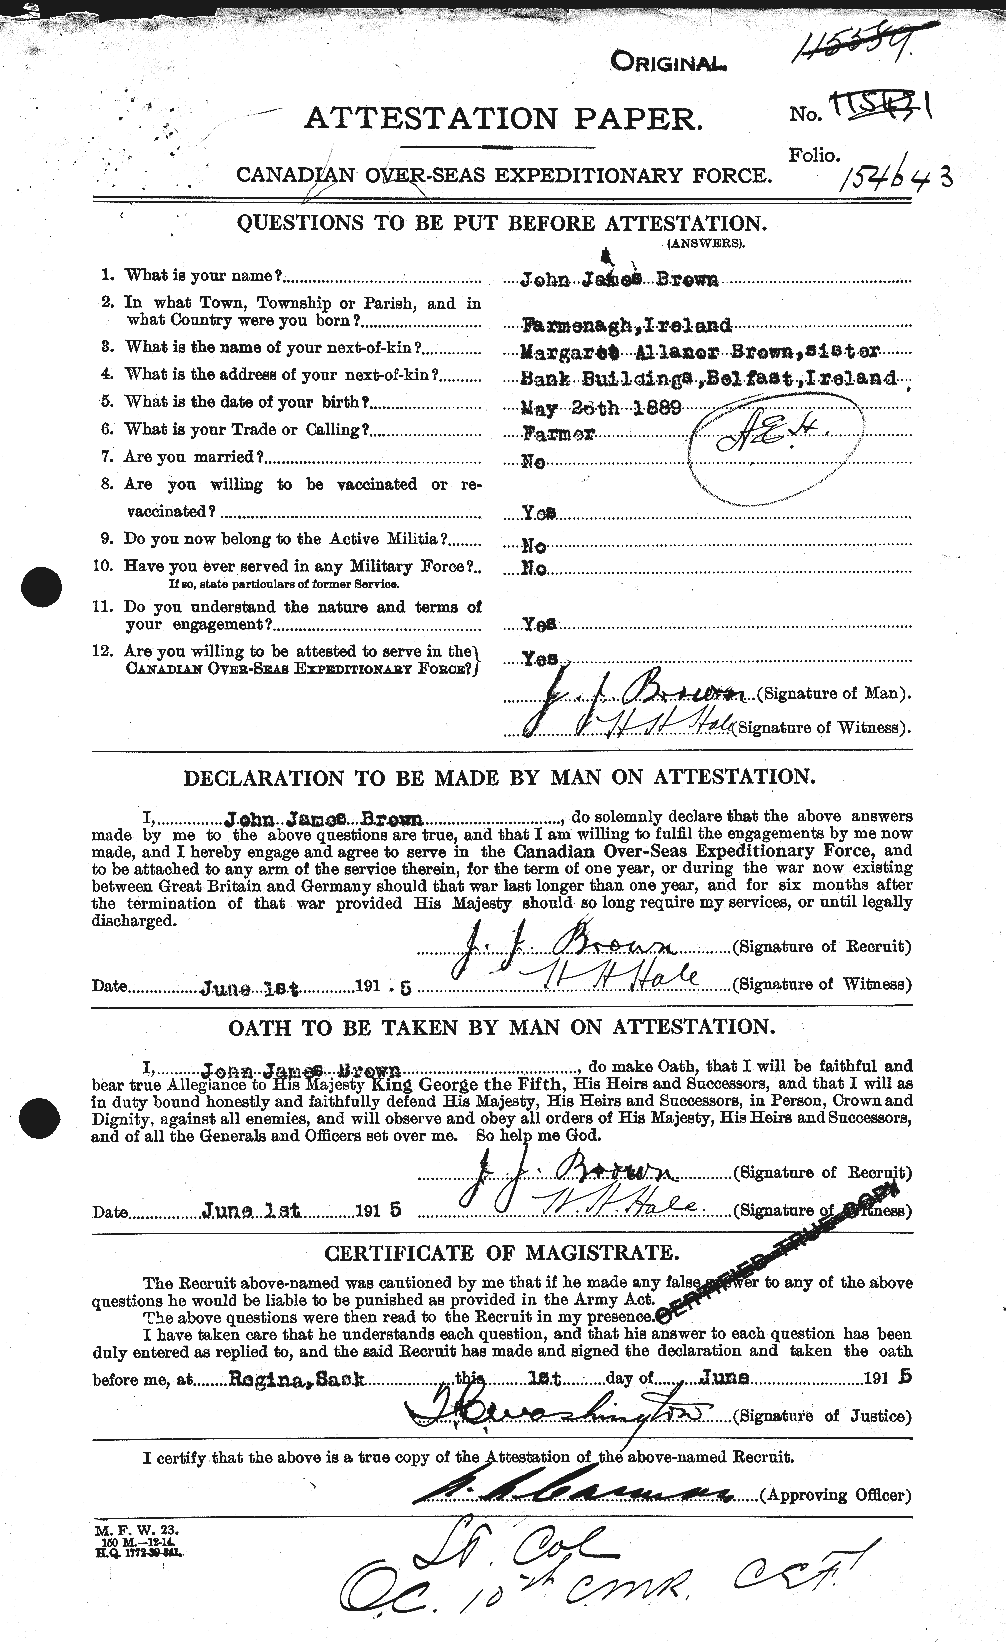 Personnel Records of the First World War - CEF 265817a